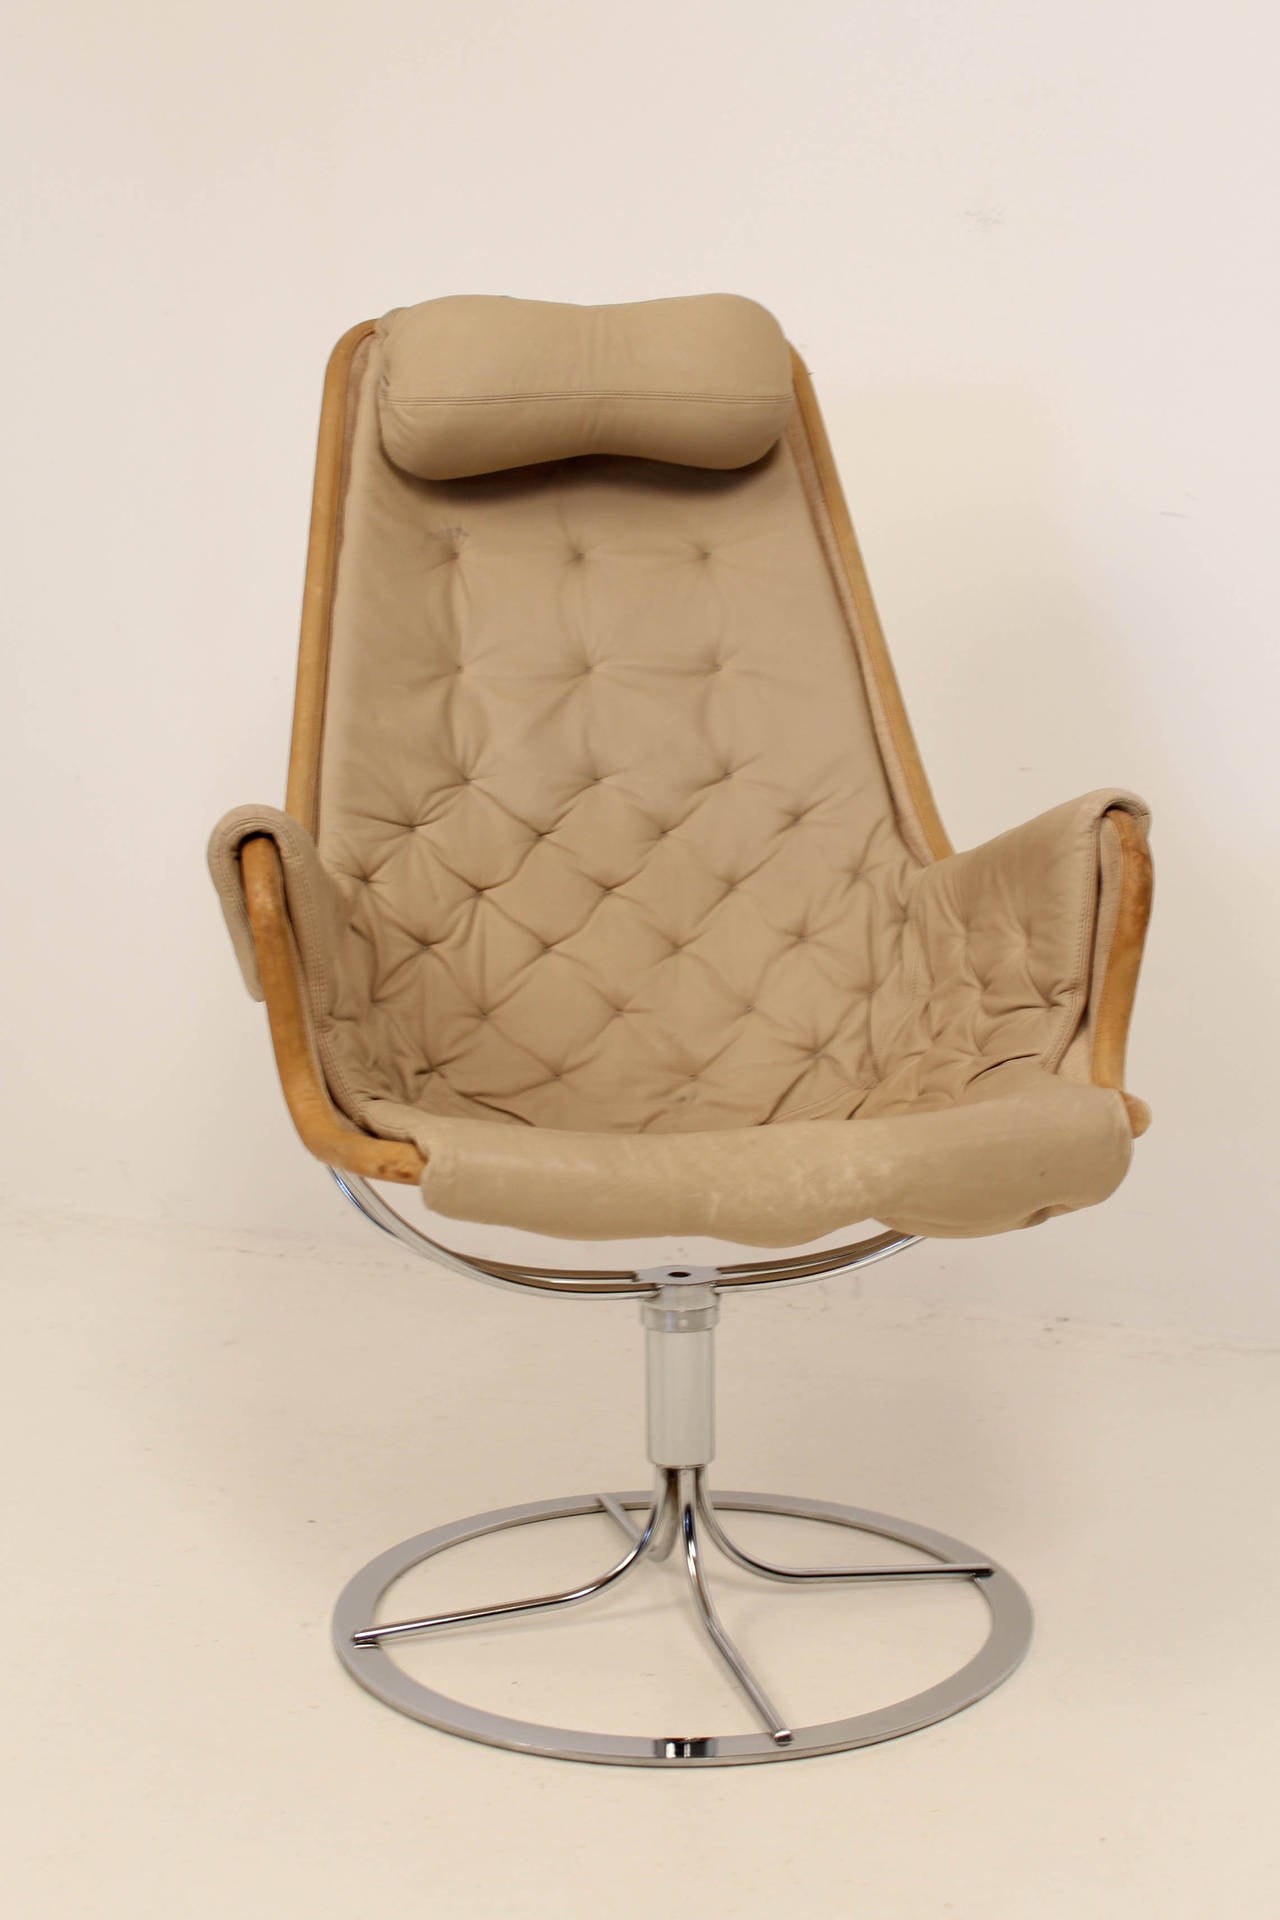 Swedish Original Jetson Lounge Chair By Bruno Mathsson For Dux